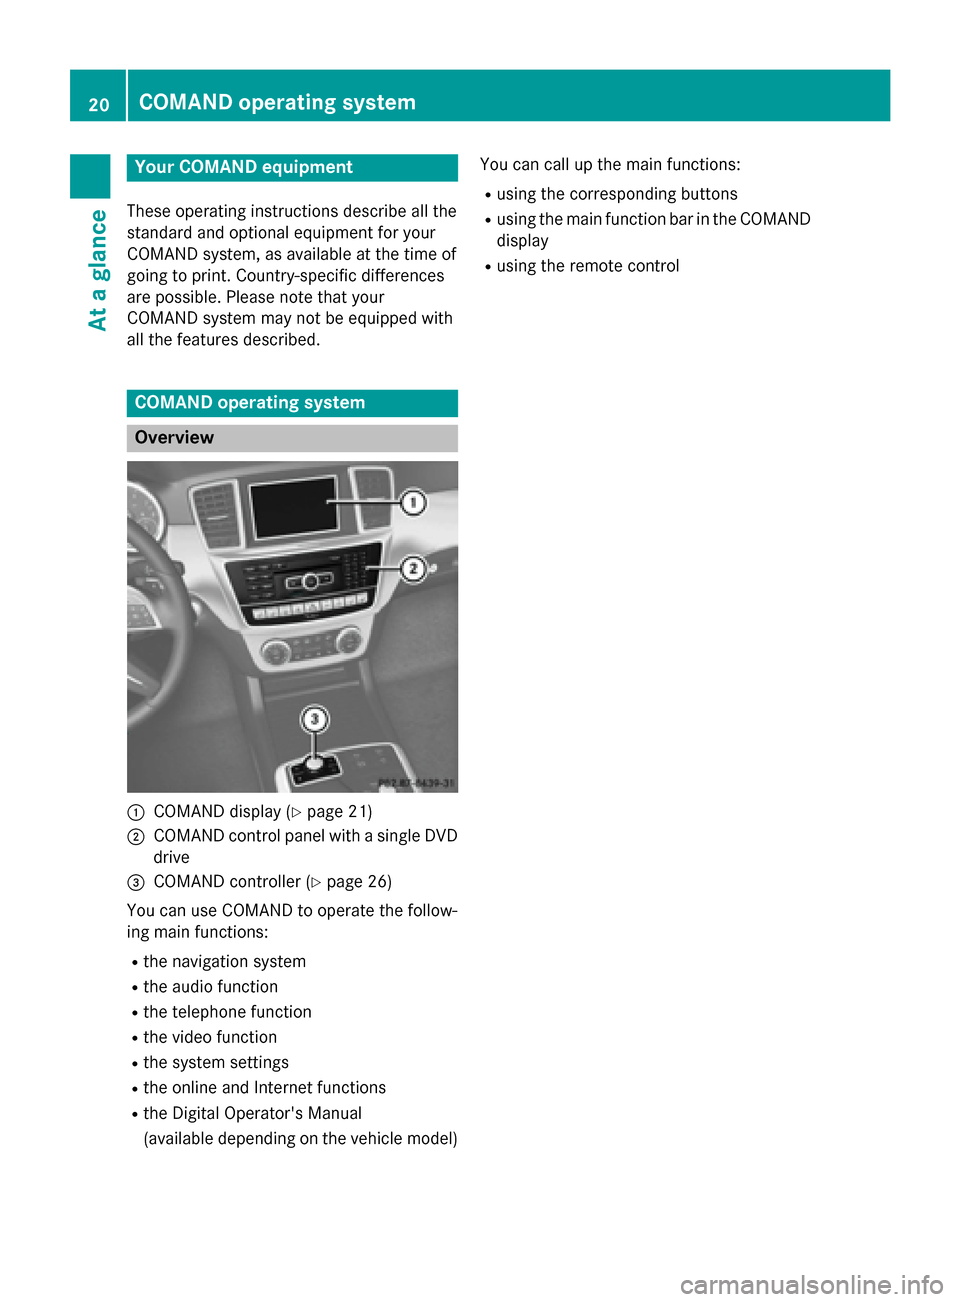 MERCEDES-BENZ B-Class 2014 W246 Comand Manual Your COMAND equipment
These operating instructions describe all the
standard and optional equipment for your
COMAND system, as available at the time of
going to print. Country-specific differences
are